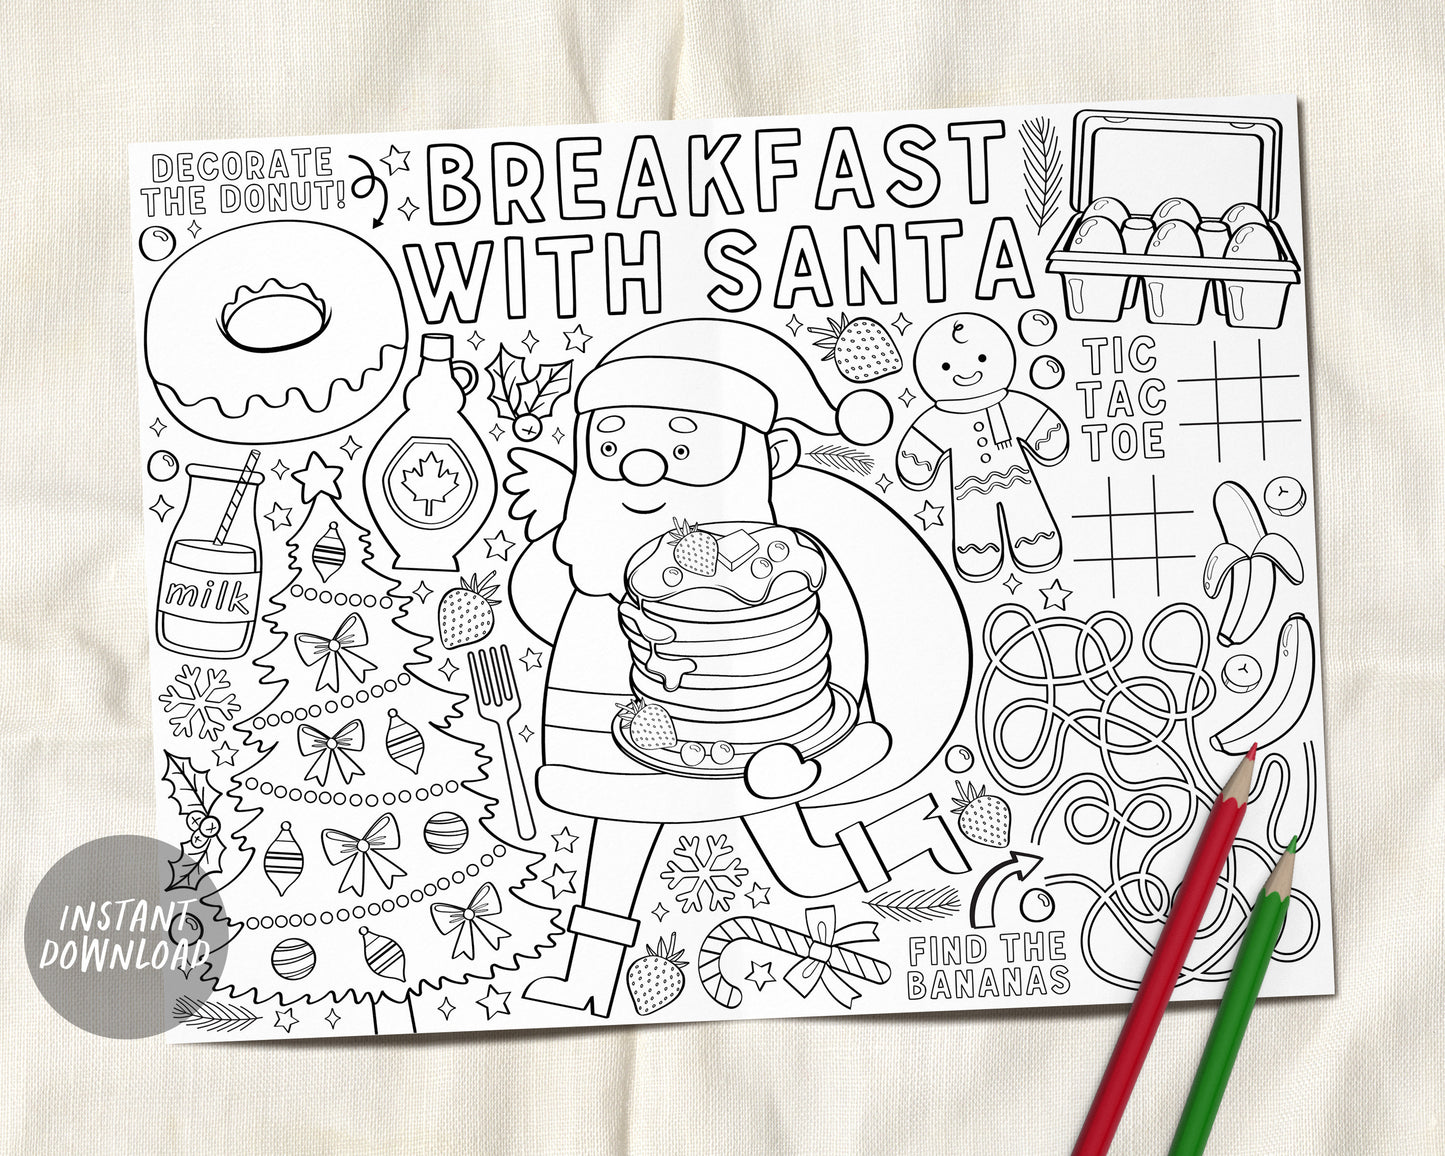 Breakfast with Santa Coloring Page Placemat For Kids, Donuts Pancakes with Santa Claus Holiday Christmas Activity Sheet Instant Download